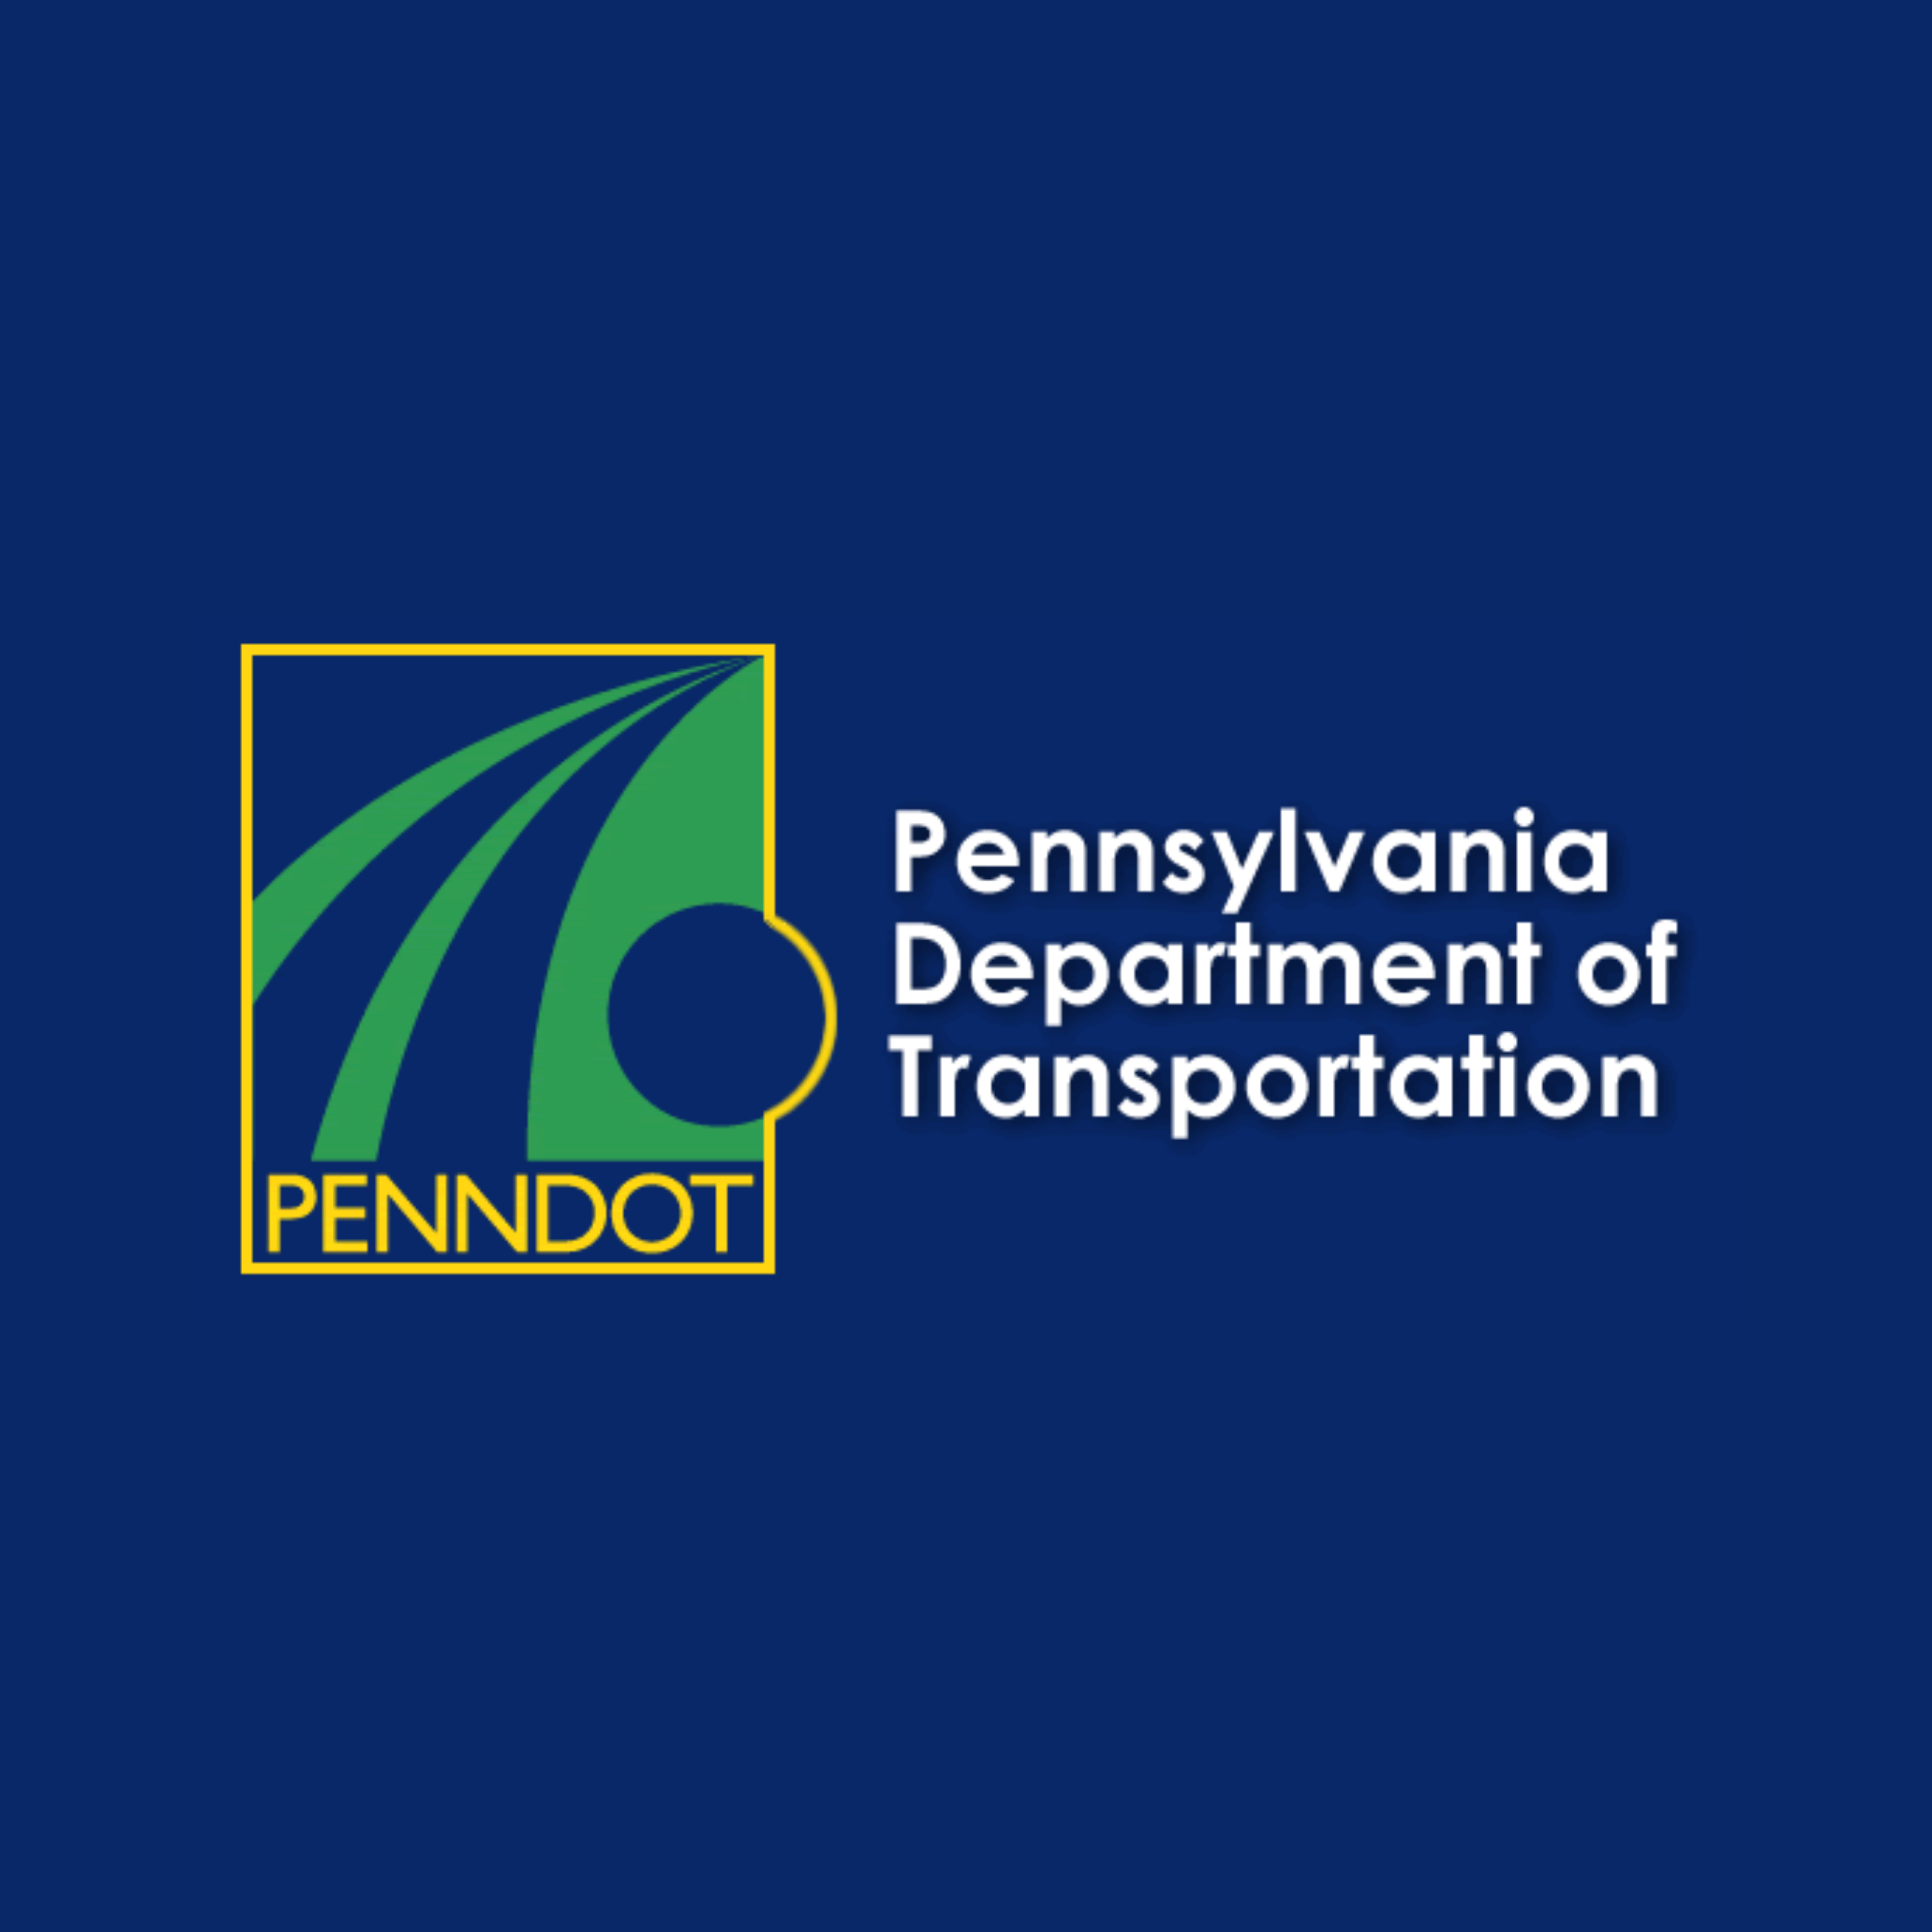 U.S. 422, N. Gulph Road Lane Closures Next Week for PA Turnpike Construction in Montgomery and Chester Counties